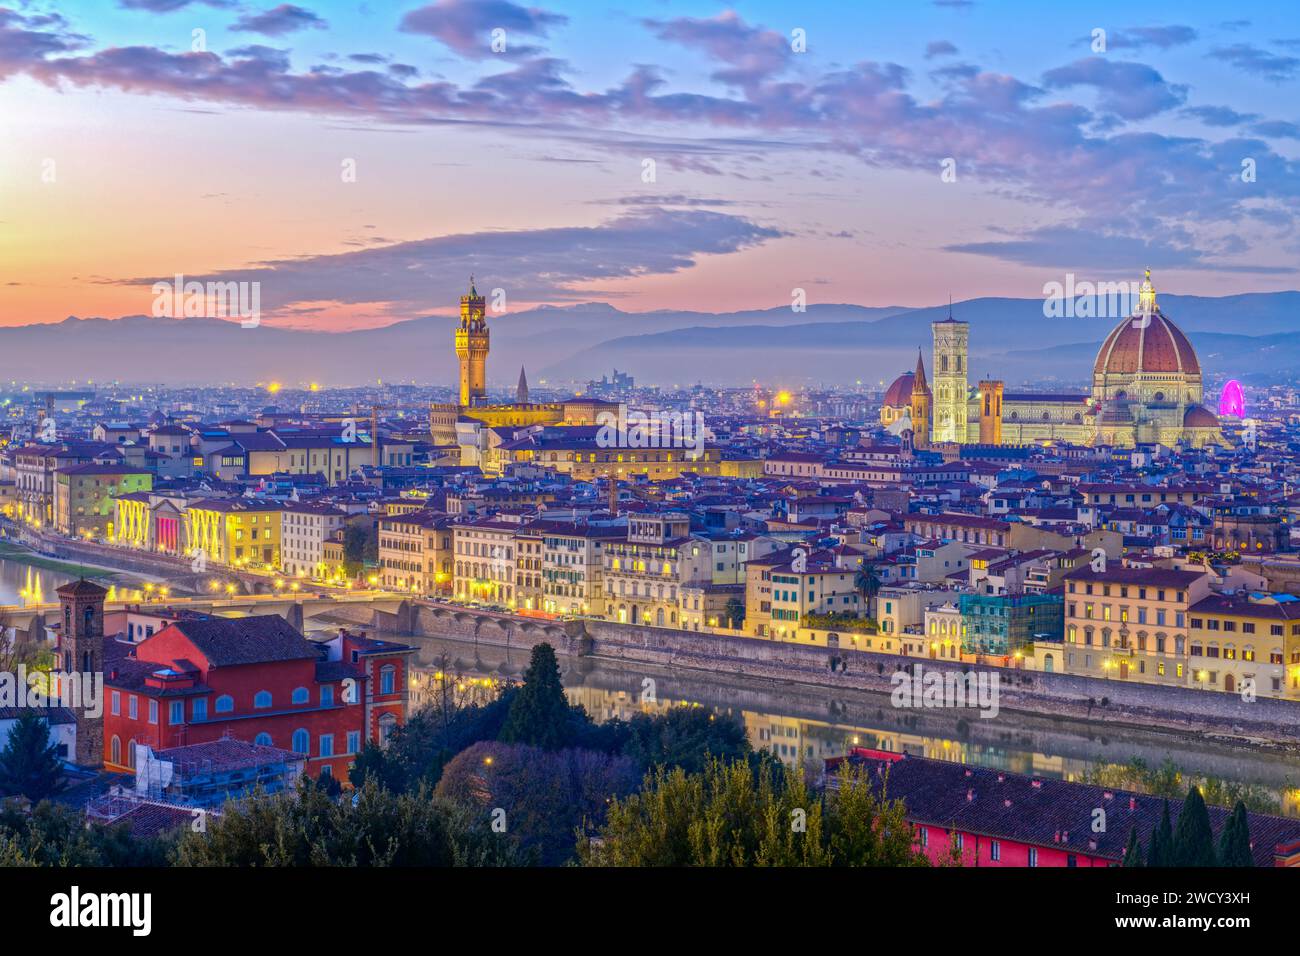 Giottos Bell Tower in Florence, Italy from above at dusk. Stock Photo